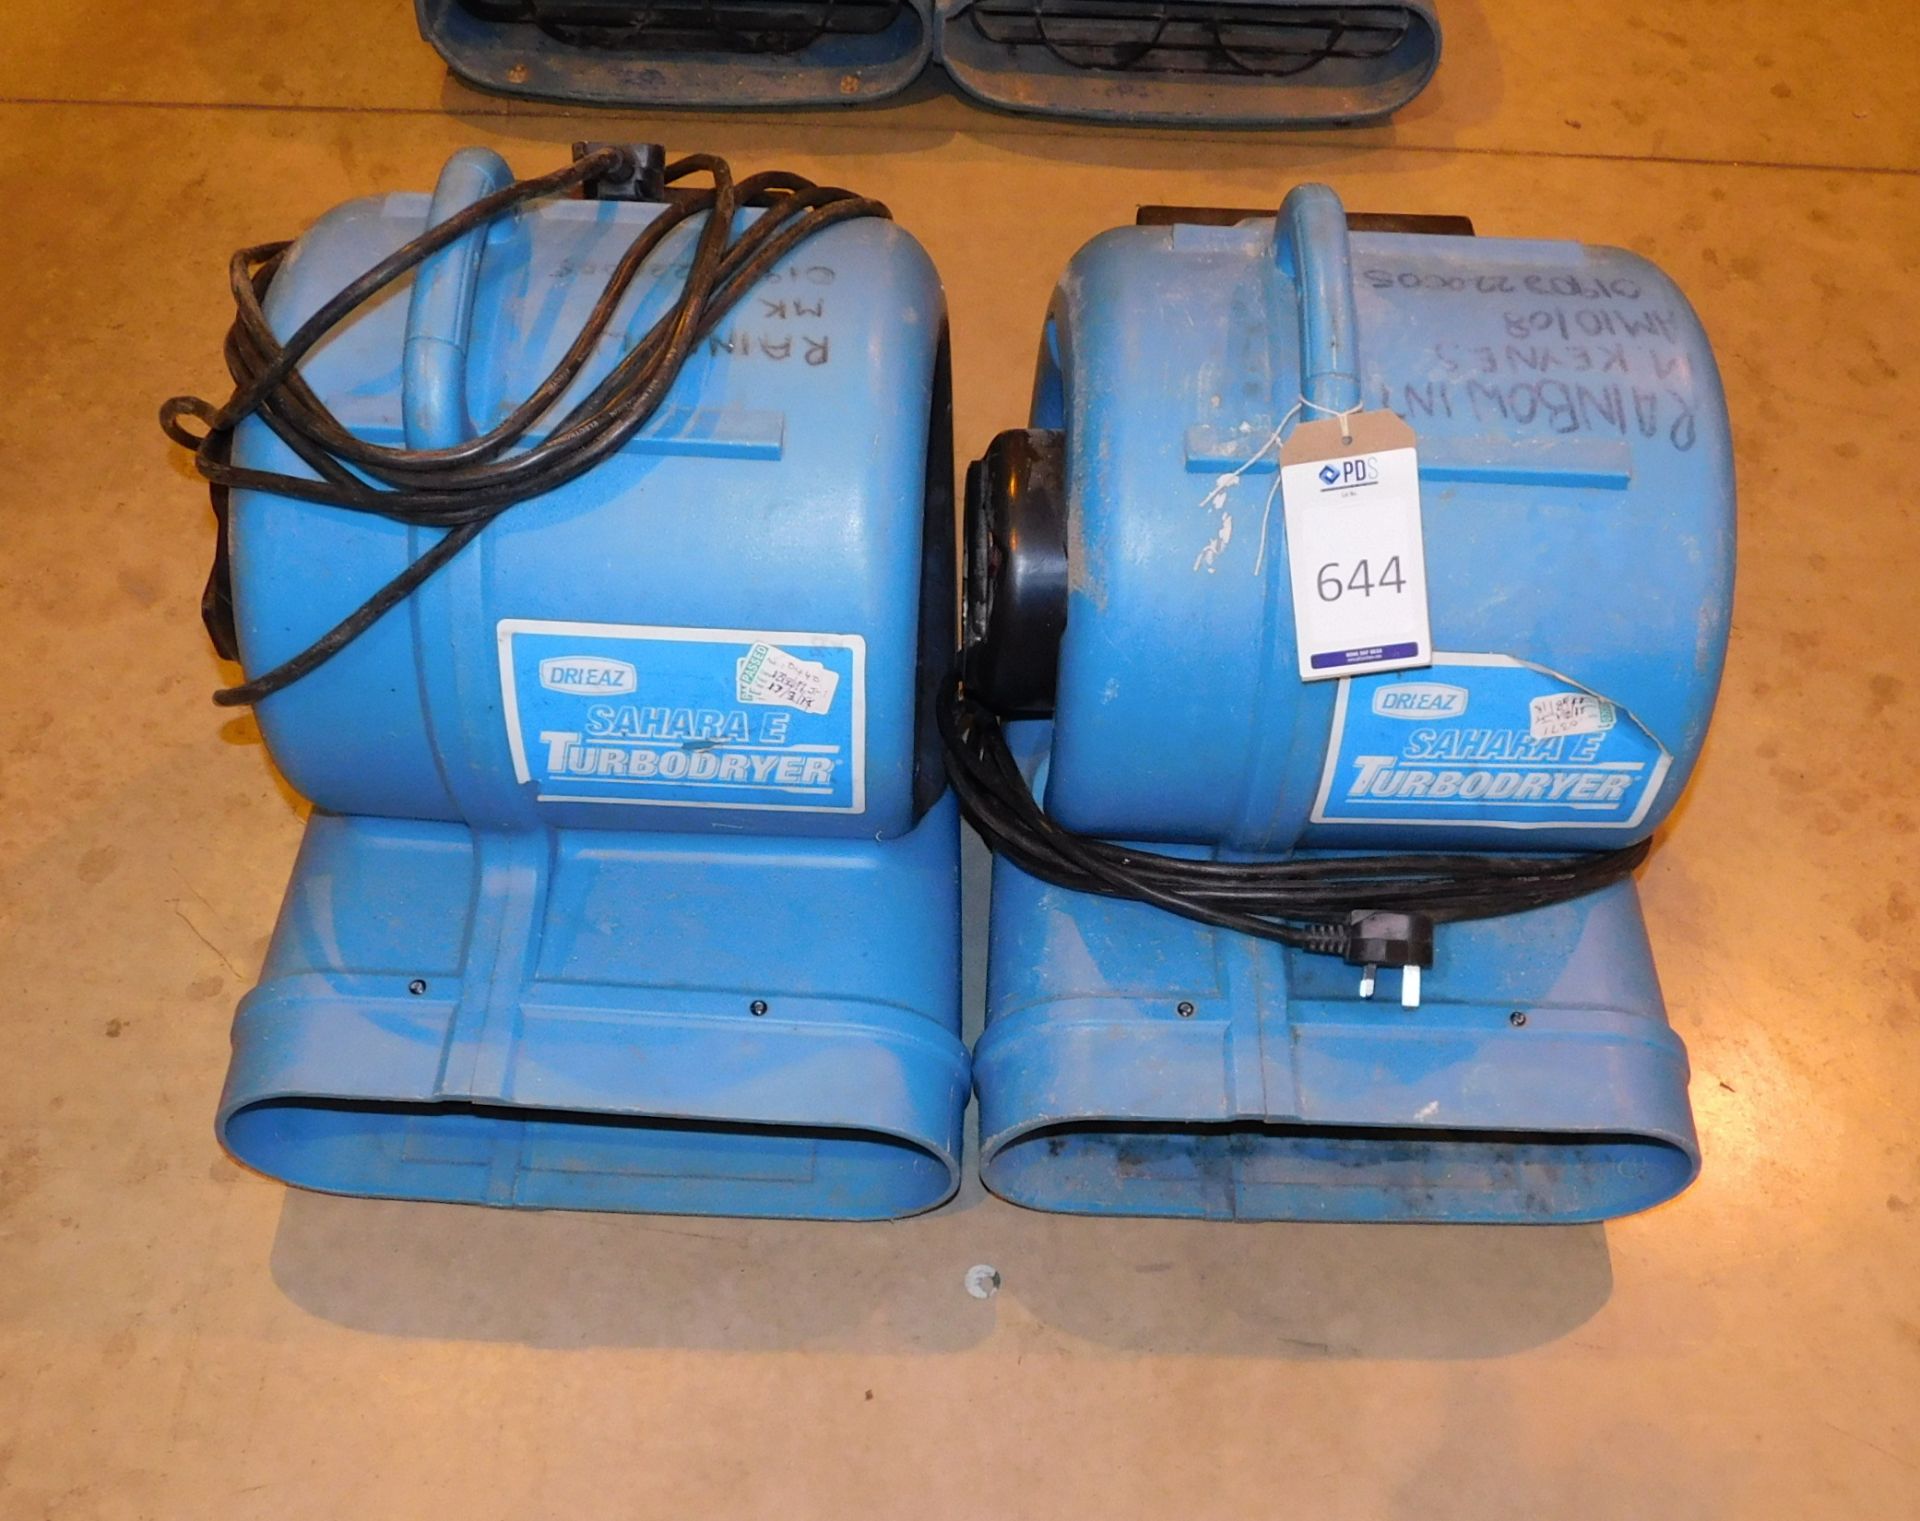 2 Drieaz Sahara E Turbodryer Air Movers (Located Milton Keynes – See General Notes for Viewing &